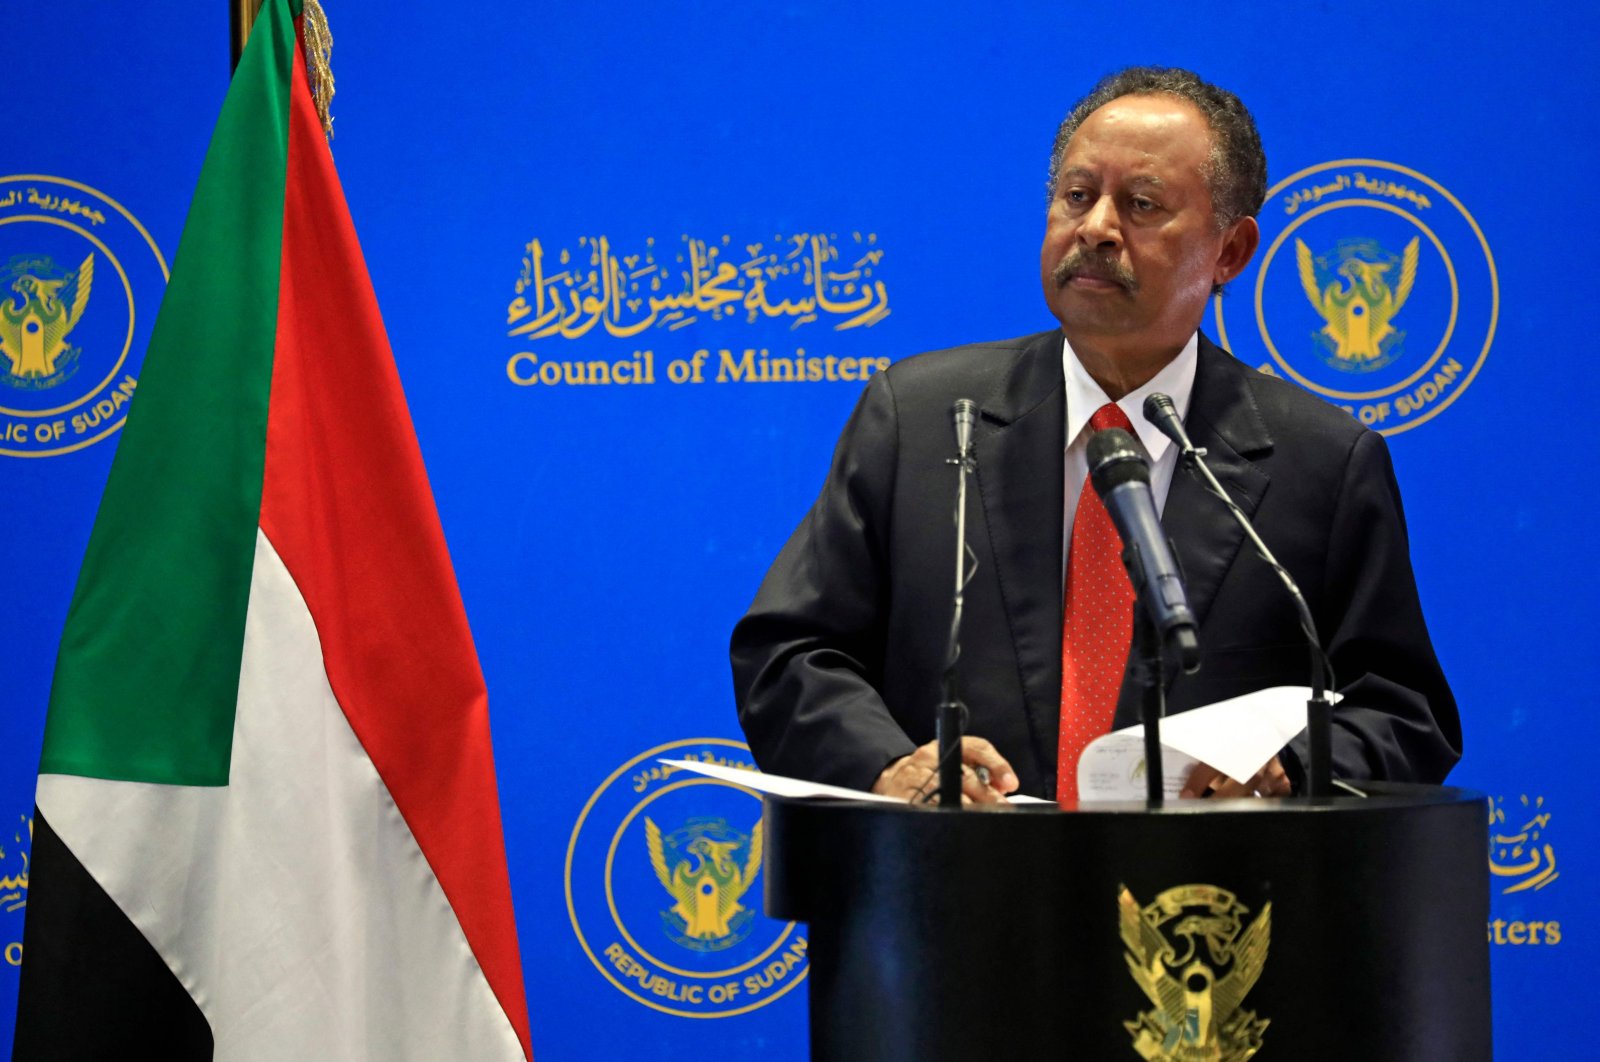 Sudanese Prime Minister Abdalla Hamdok holds a press conference at the Council of Ministers in the capital Khartoum, Sudan, August 15, 2021. (AFP Photo)